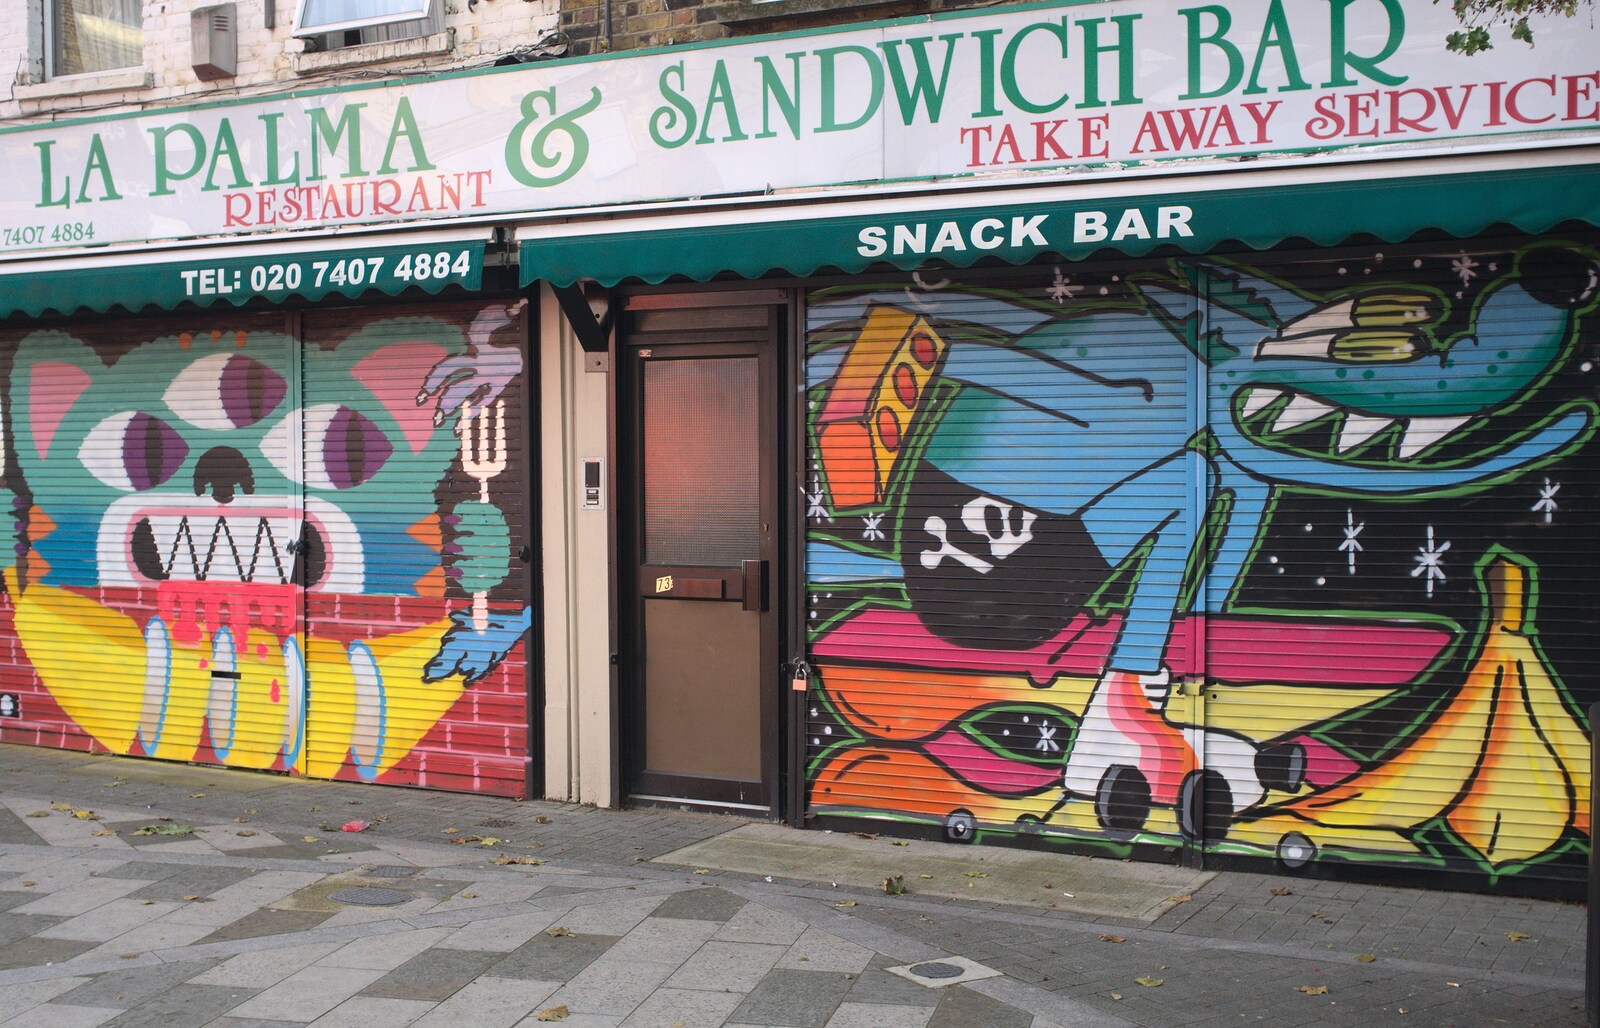 La Palma Sandwich Bar, with colourful graffiti from TouchType Office Life and Pizza, Southwark, London - 20th October 2012